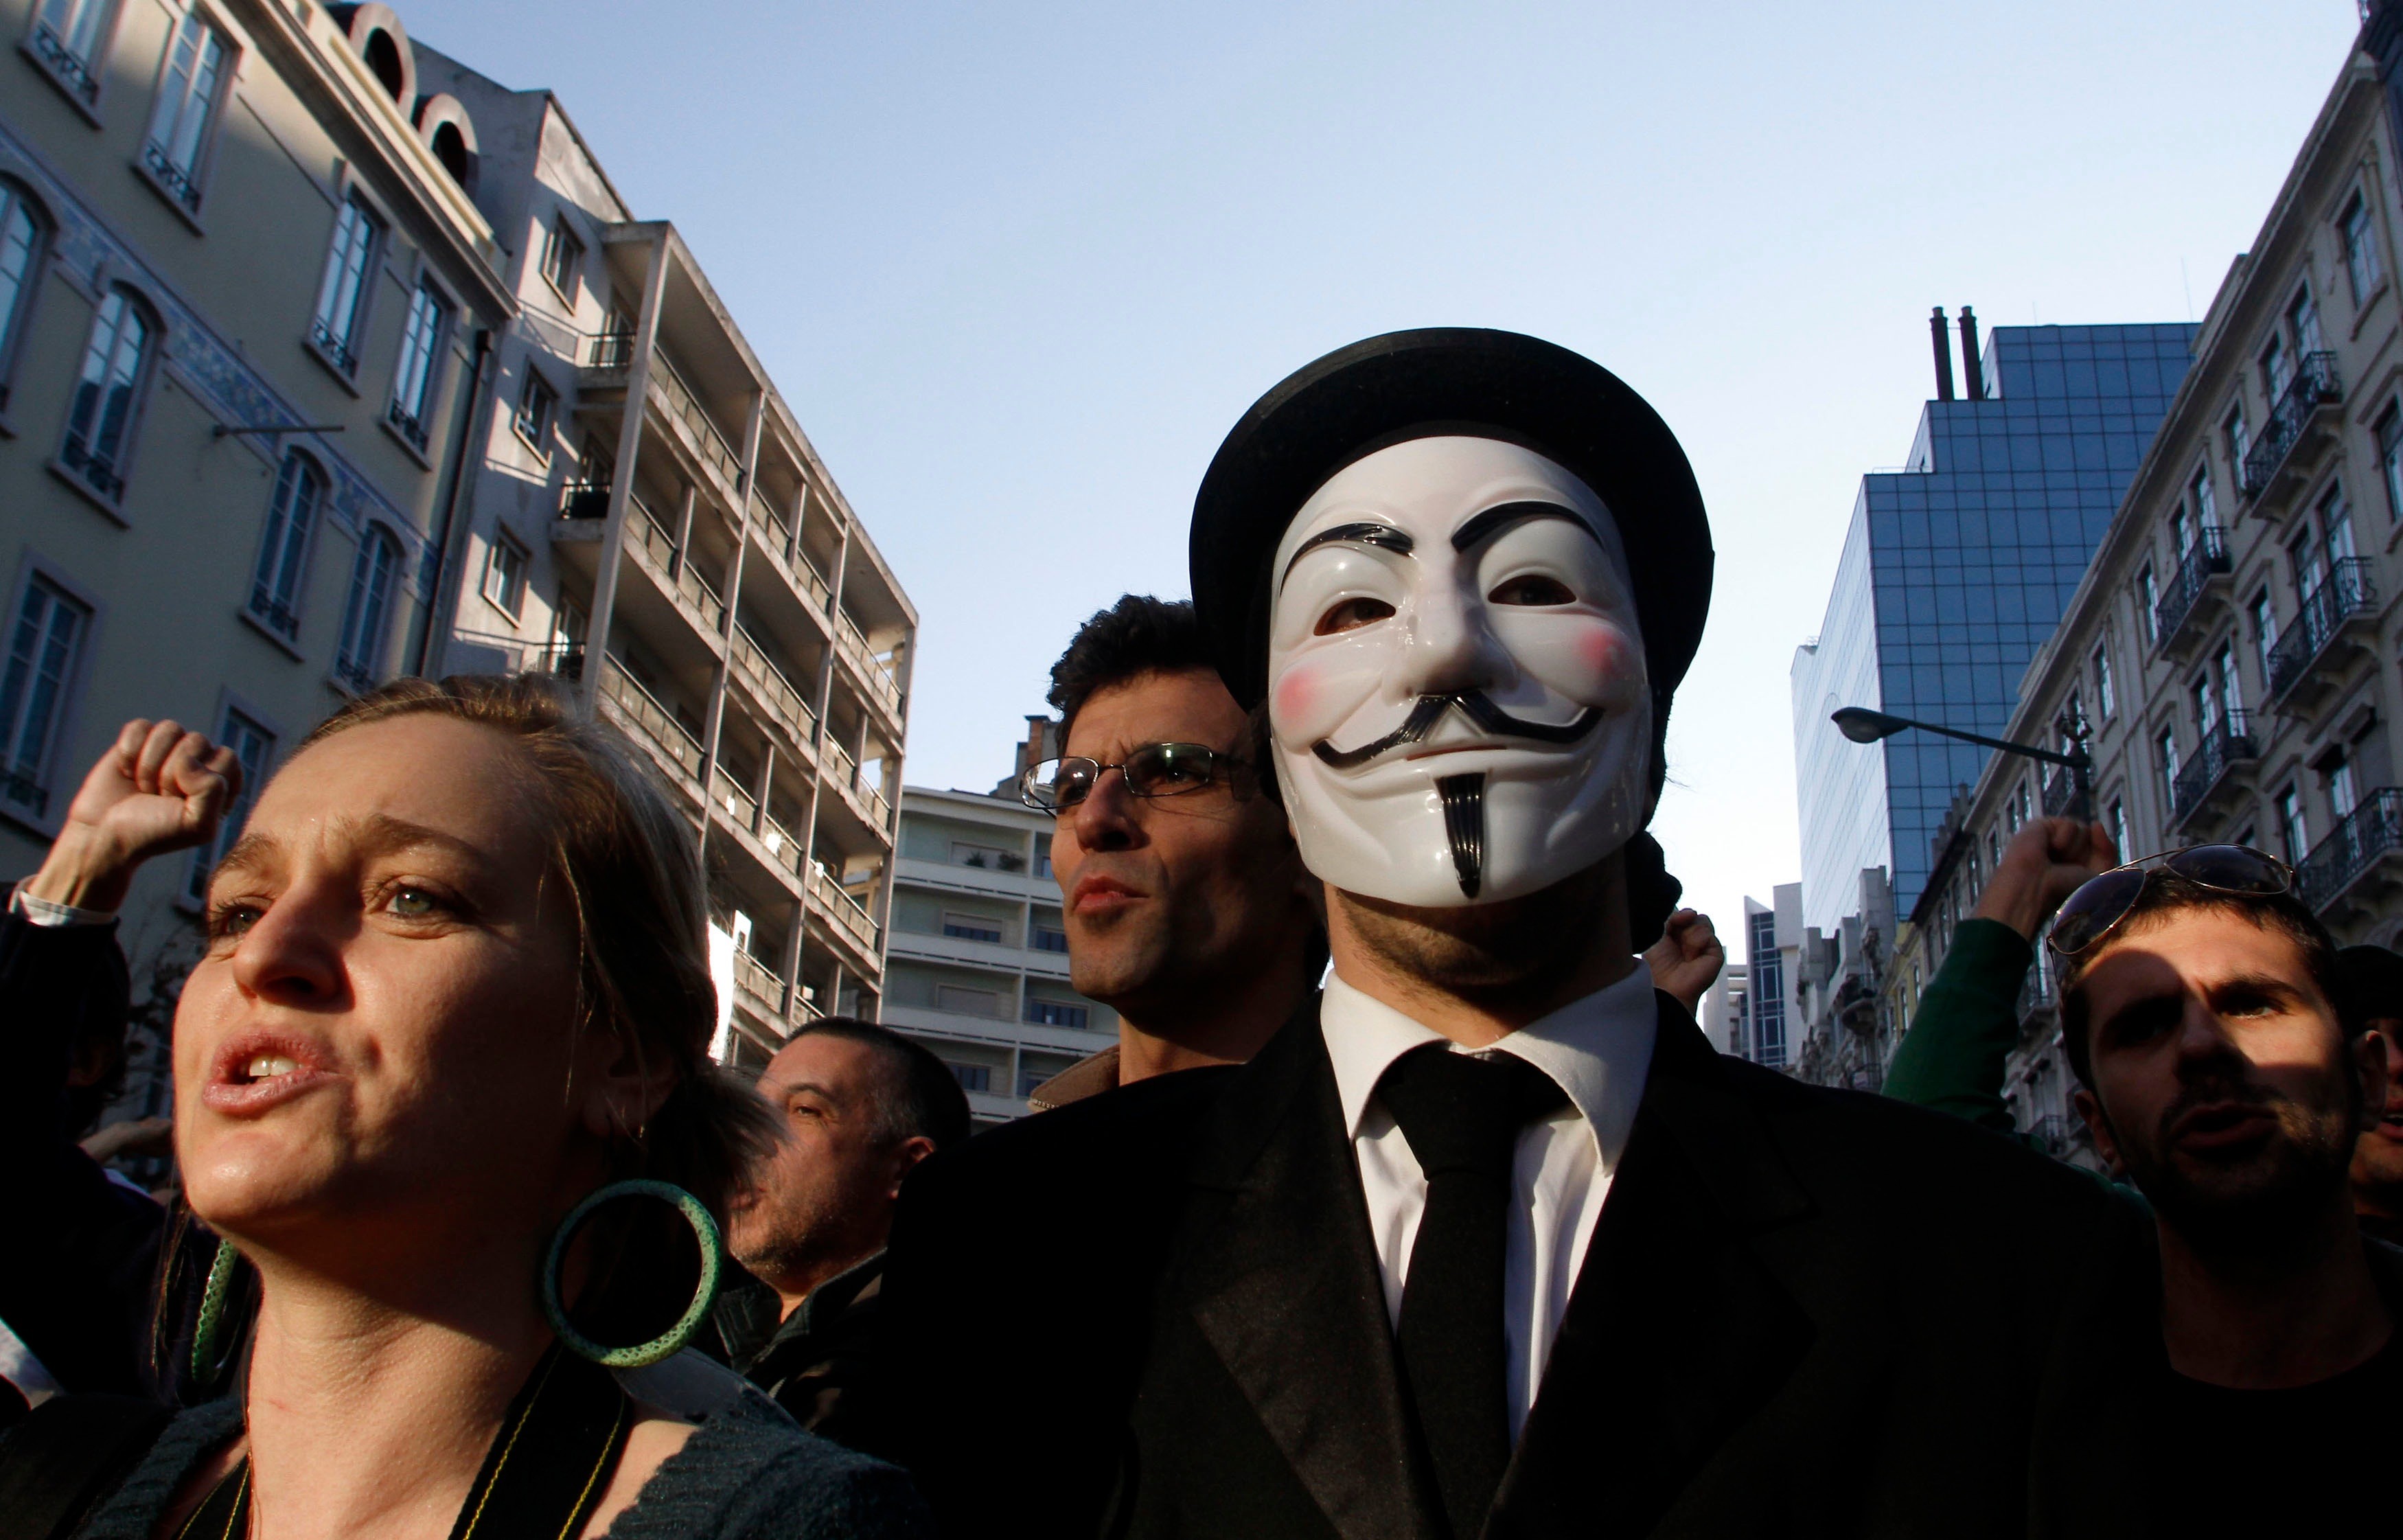 Anonymous, Portugal, Guy Fawkes, occupy, Occupy Wall Street - desktop wallpaper